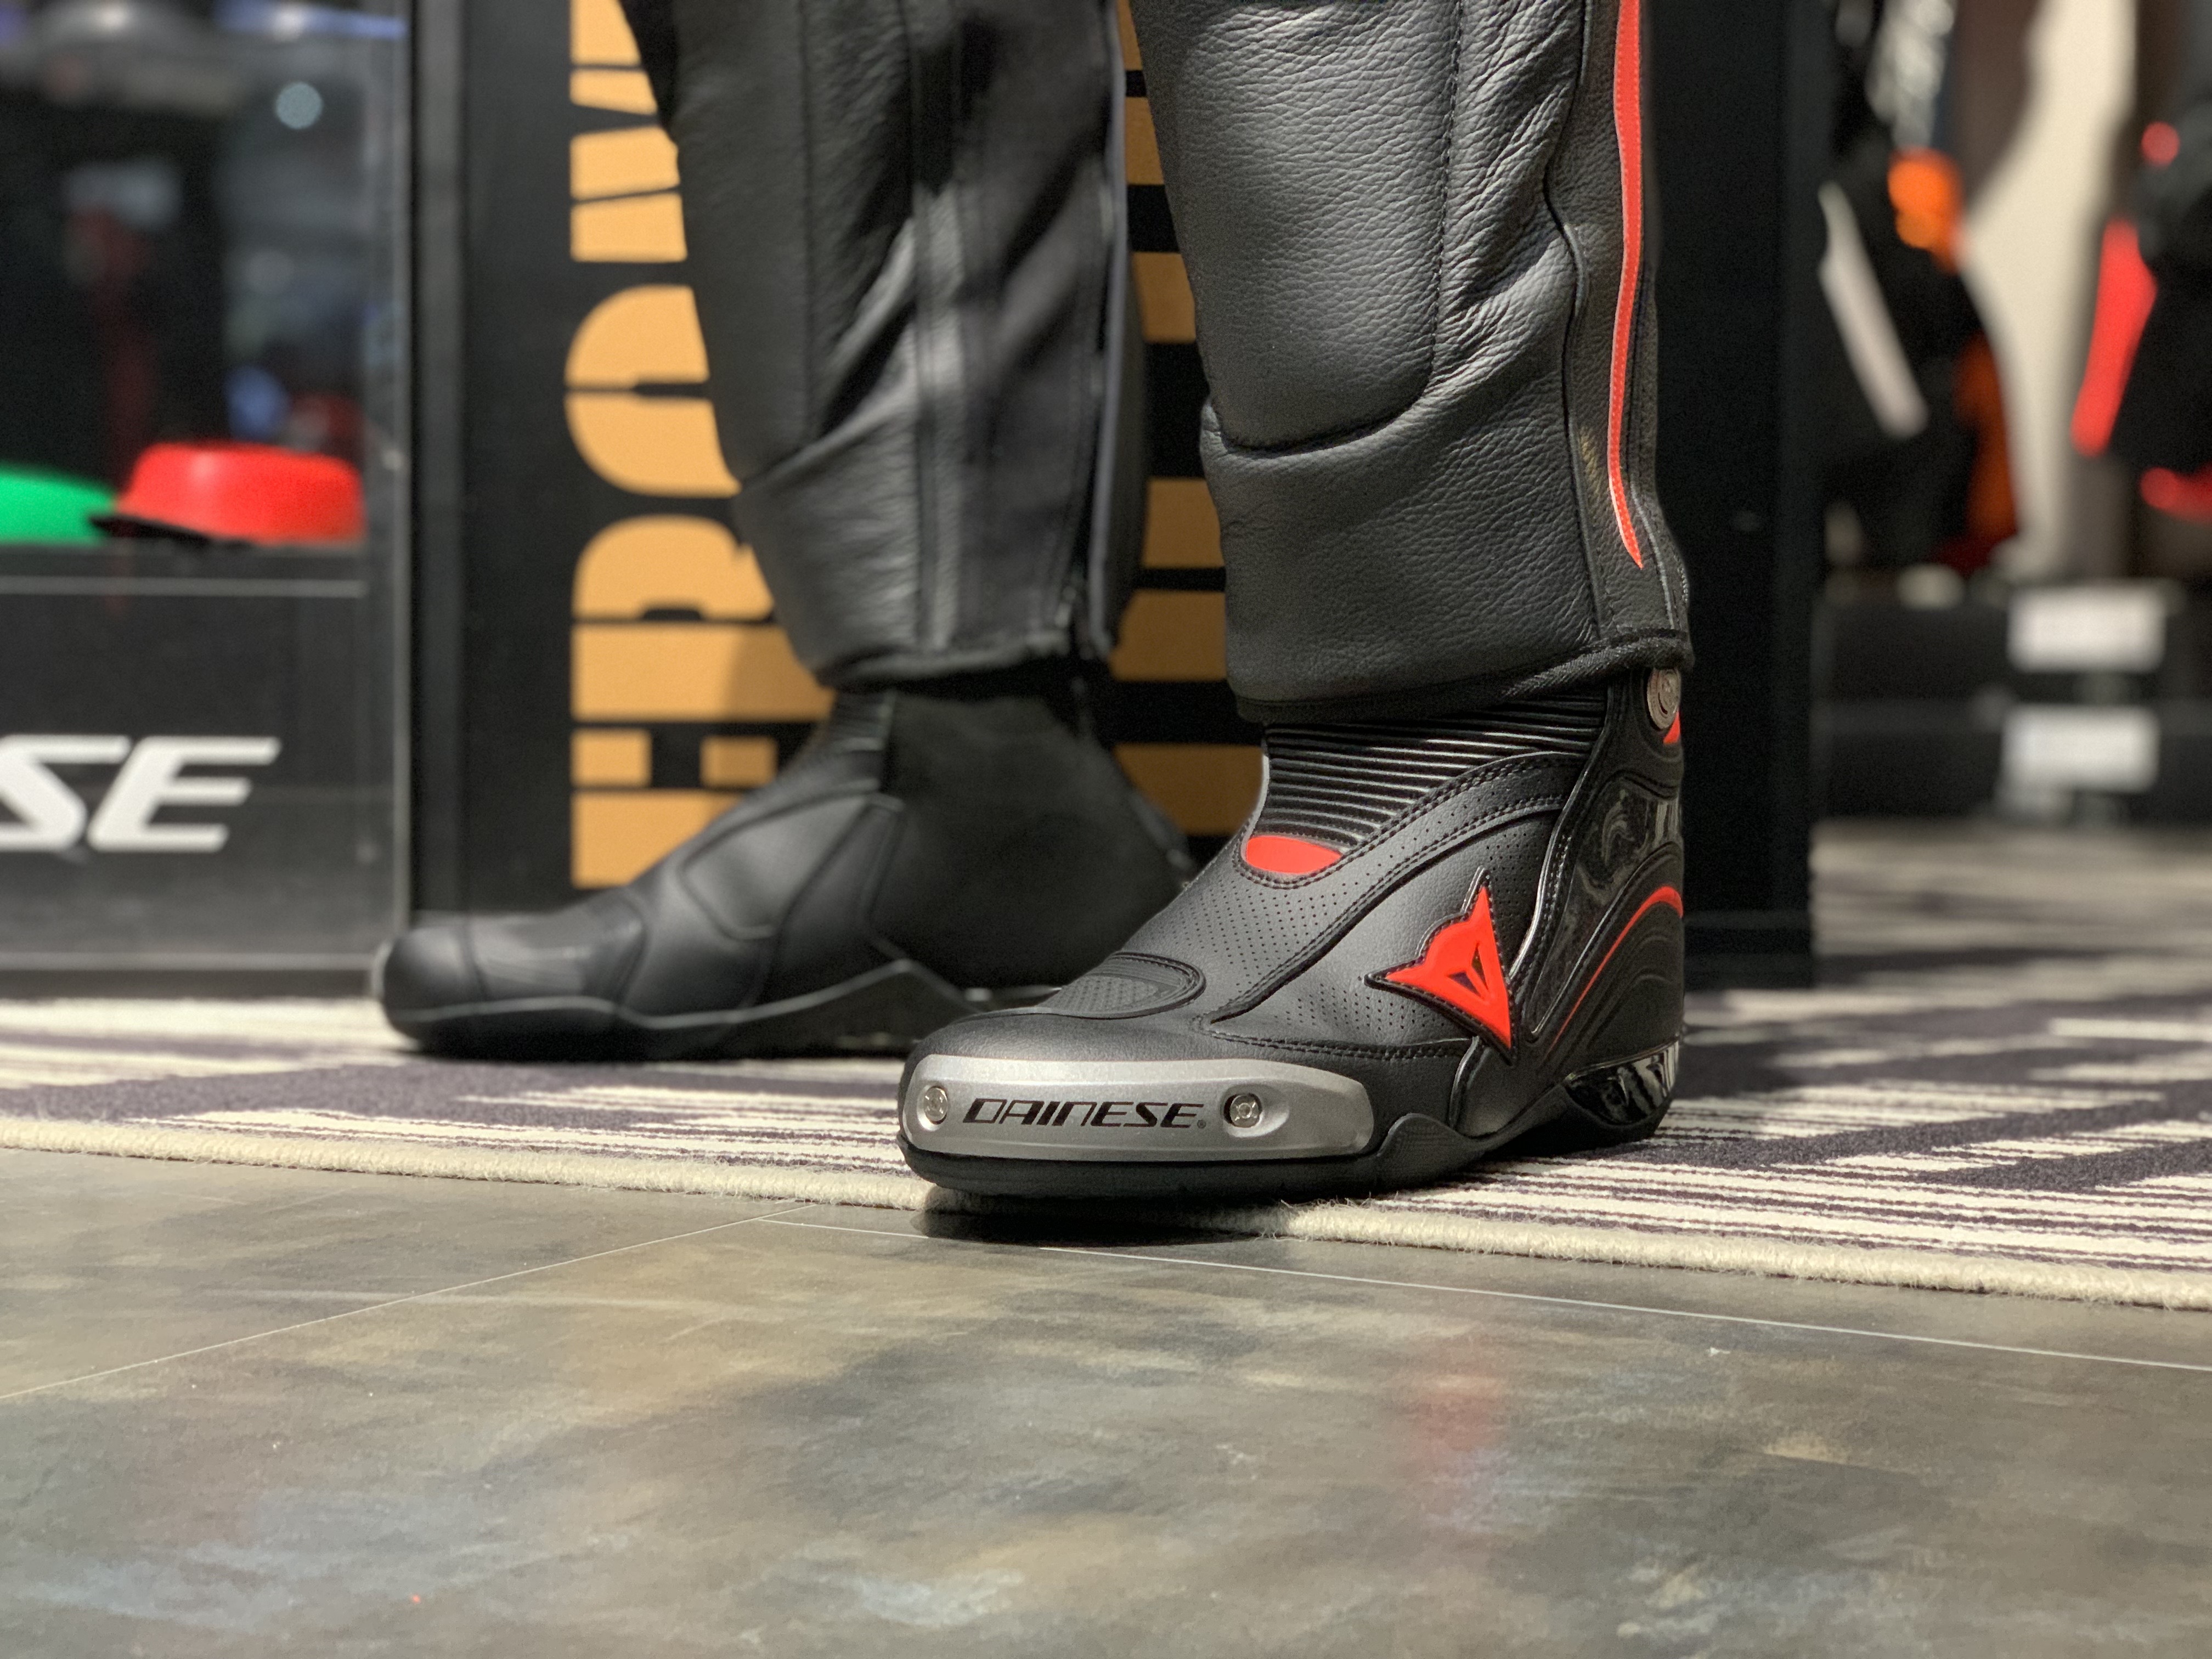 DAINESE AXIAL D1 IN BOOTS